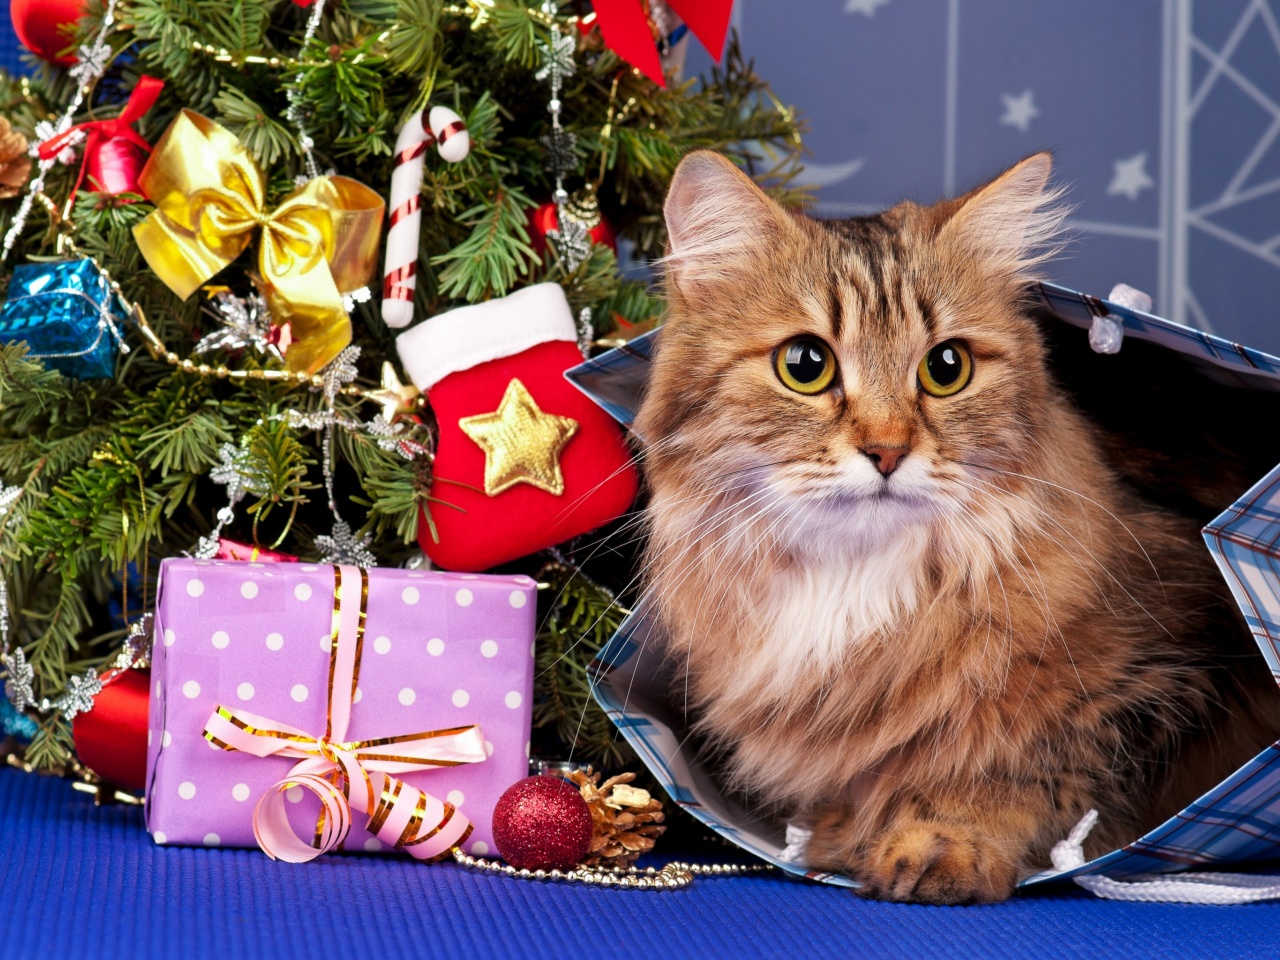 Merry Christmas Cards Wishes with Cat wallpaper 1280x960